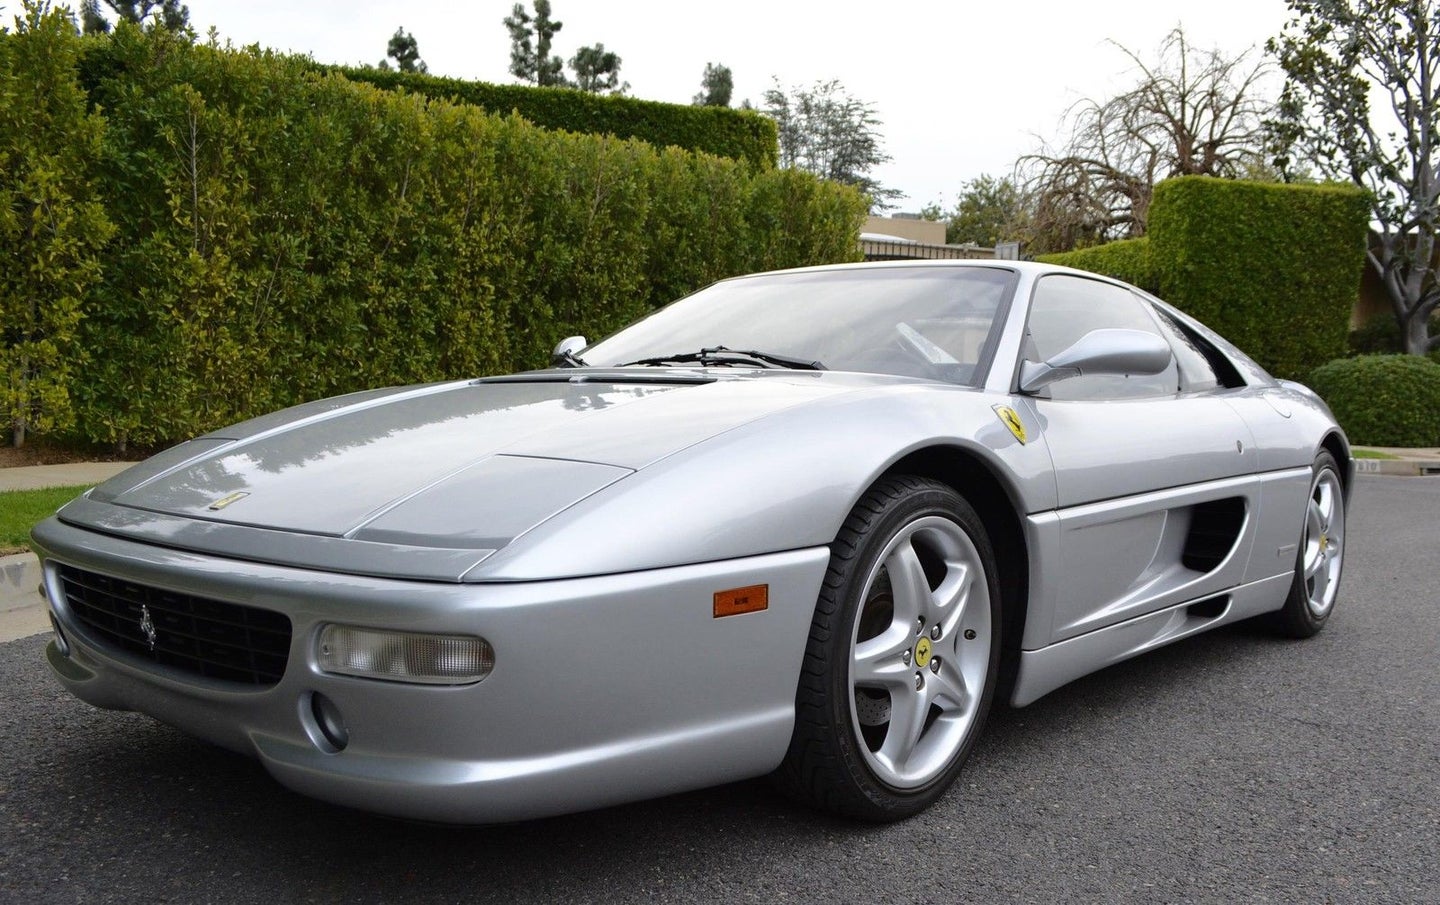 This Ferrari F355 Berlinetta Converted To a Gated Manual Could Be Yours